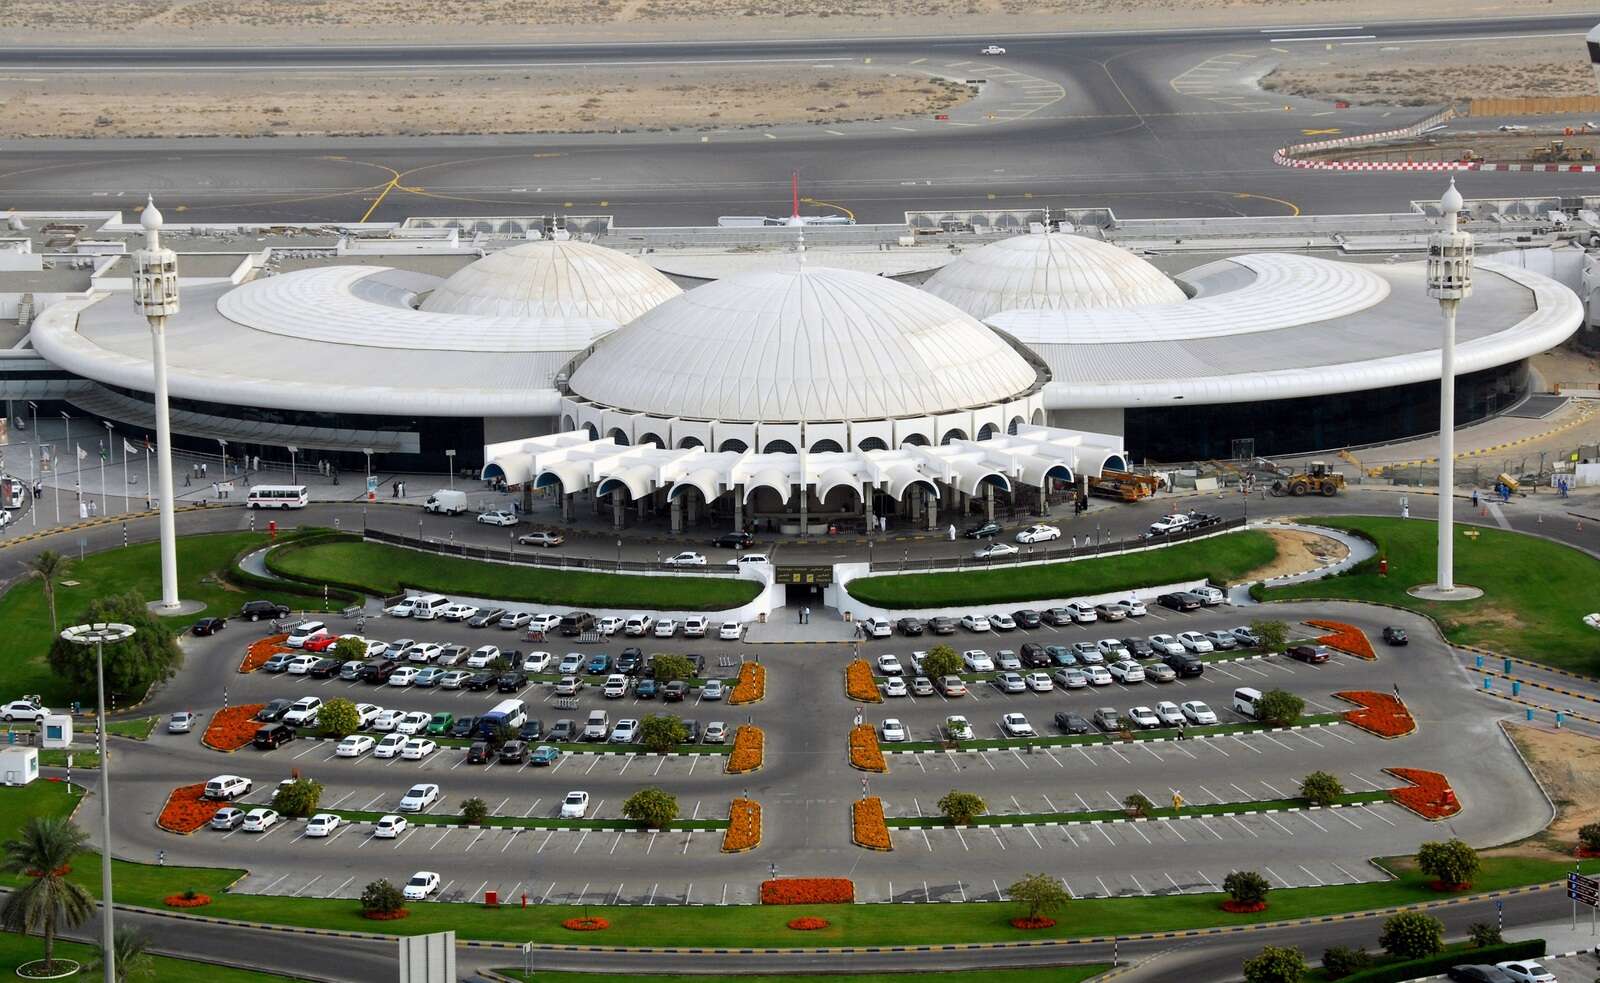 sharjah airport confirms continuity of flight operations